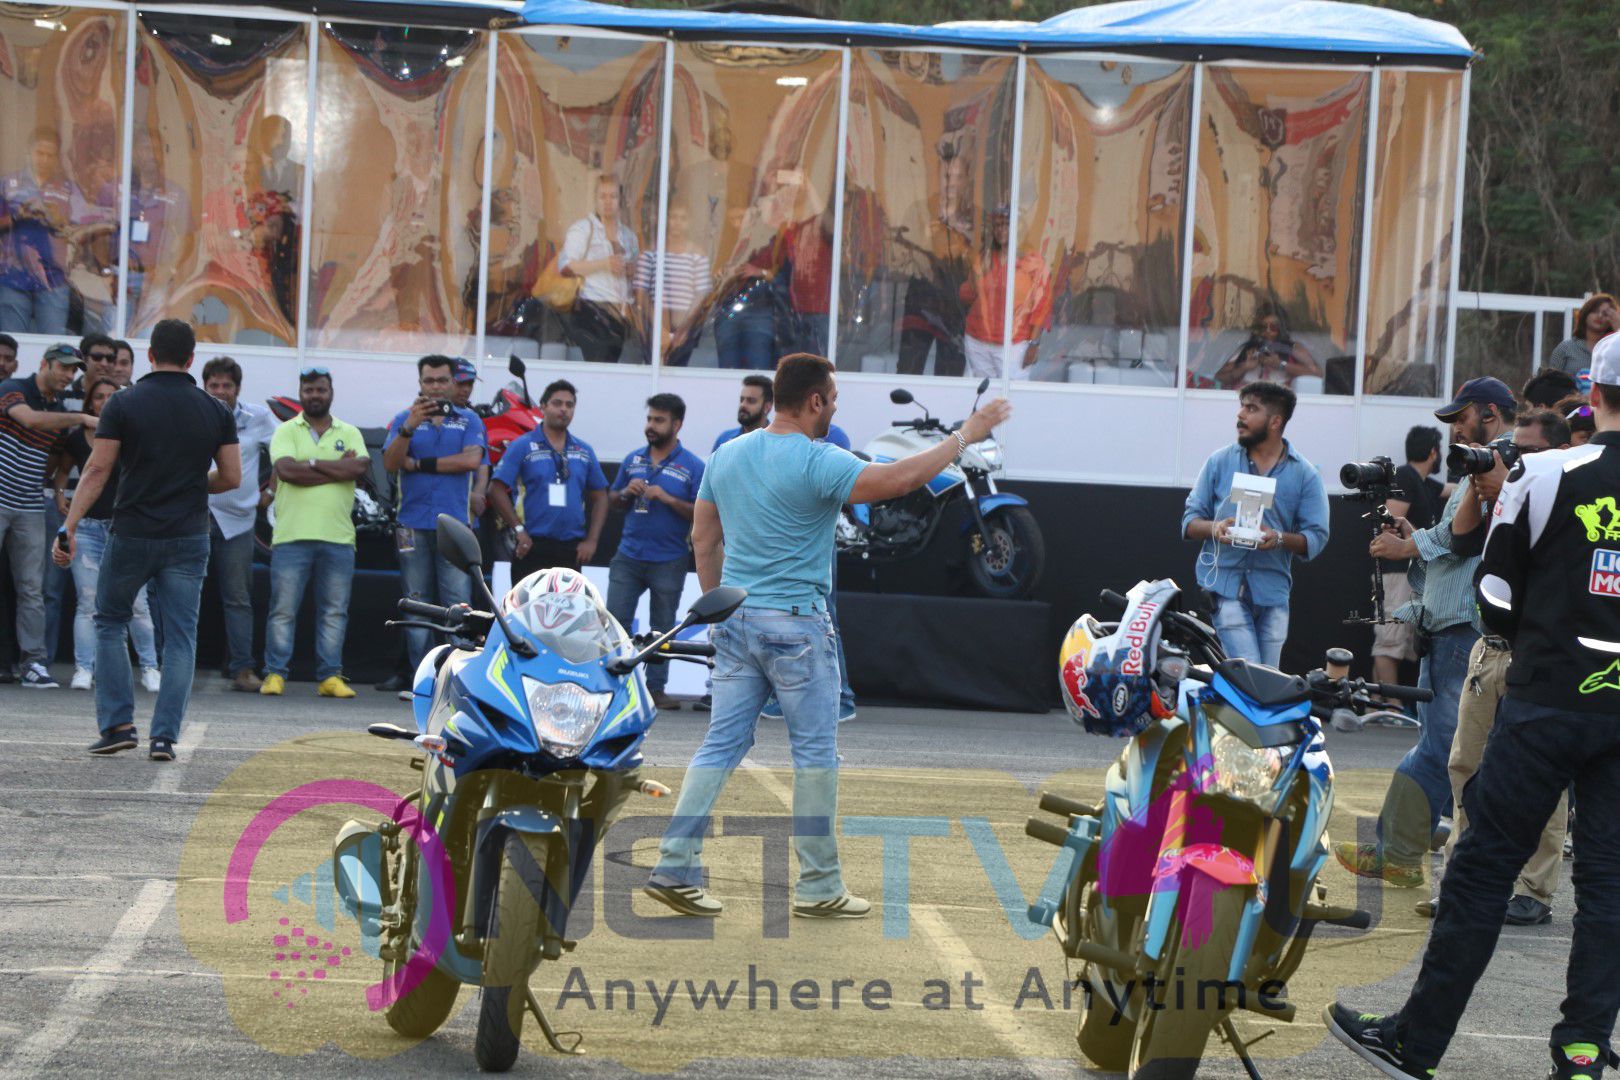  Salman Khan As They Come Together For The Suzuki Gixxer Day Event Photos Hindi Gallery